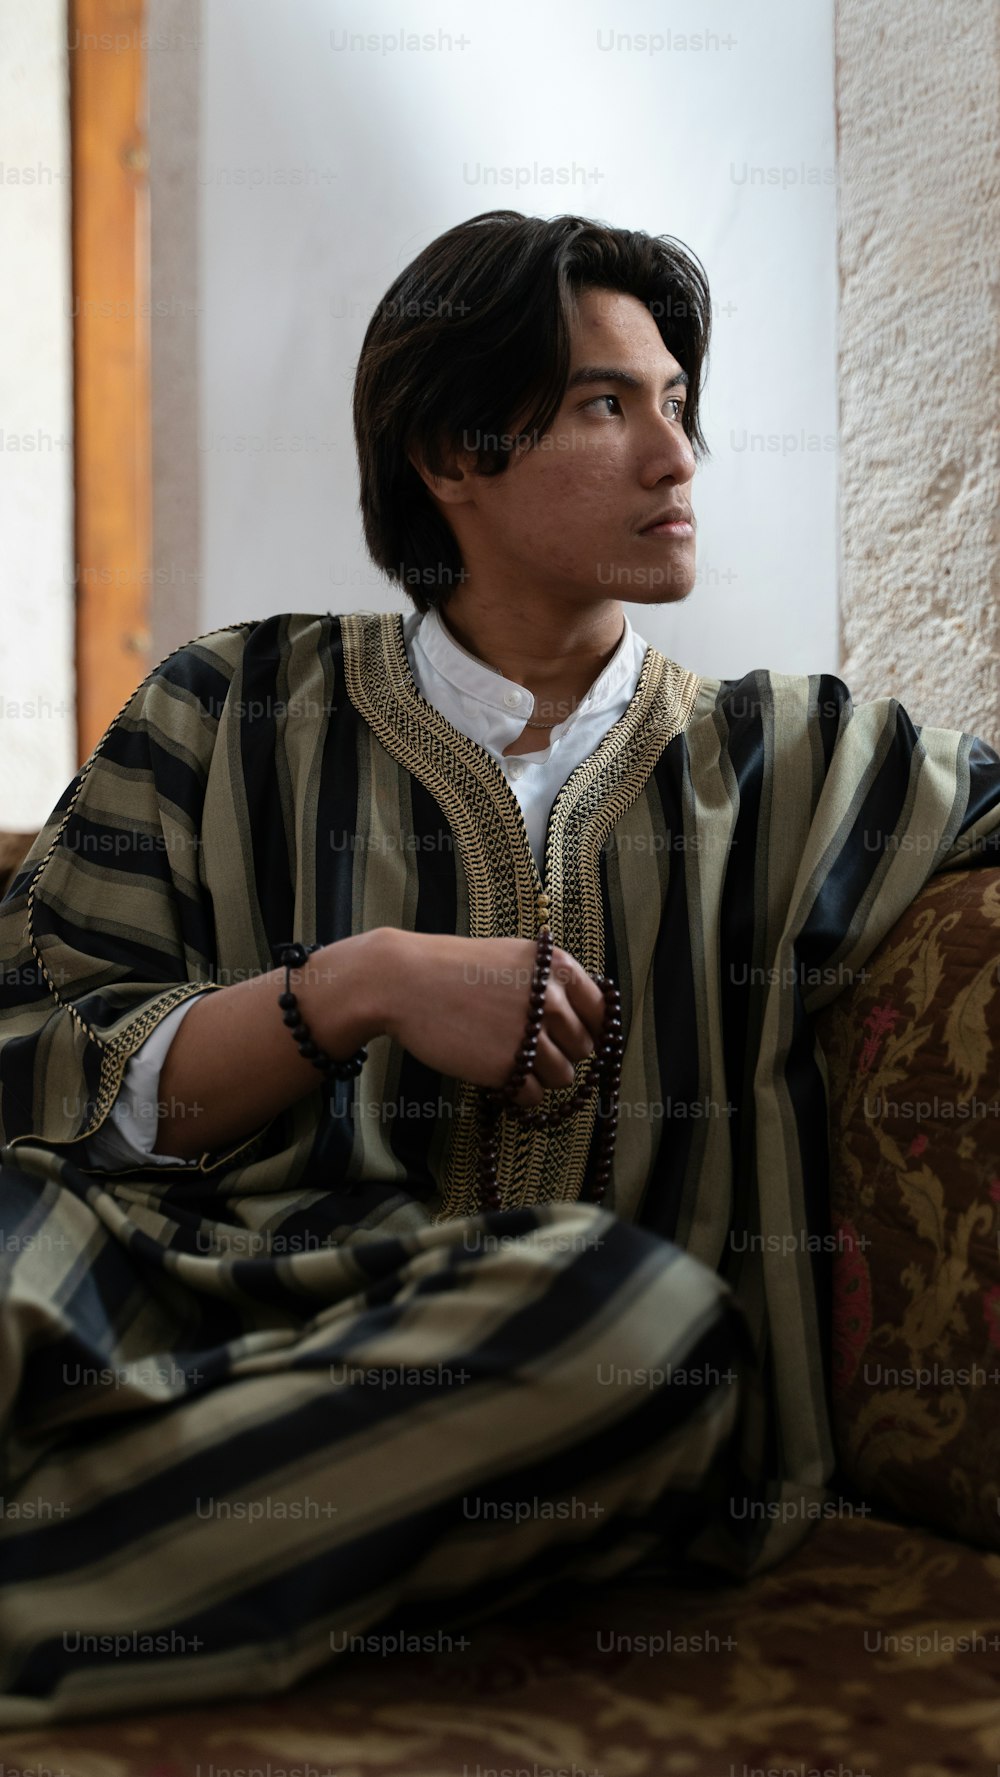 a man sitting on a couch wearing a striped robe